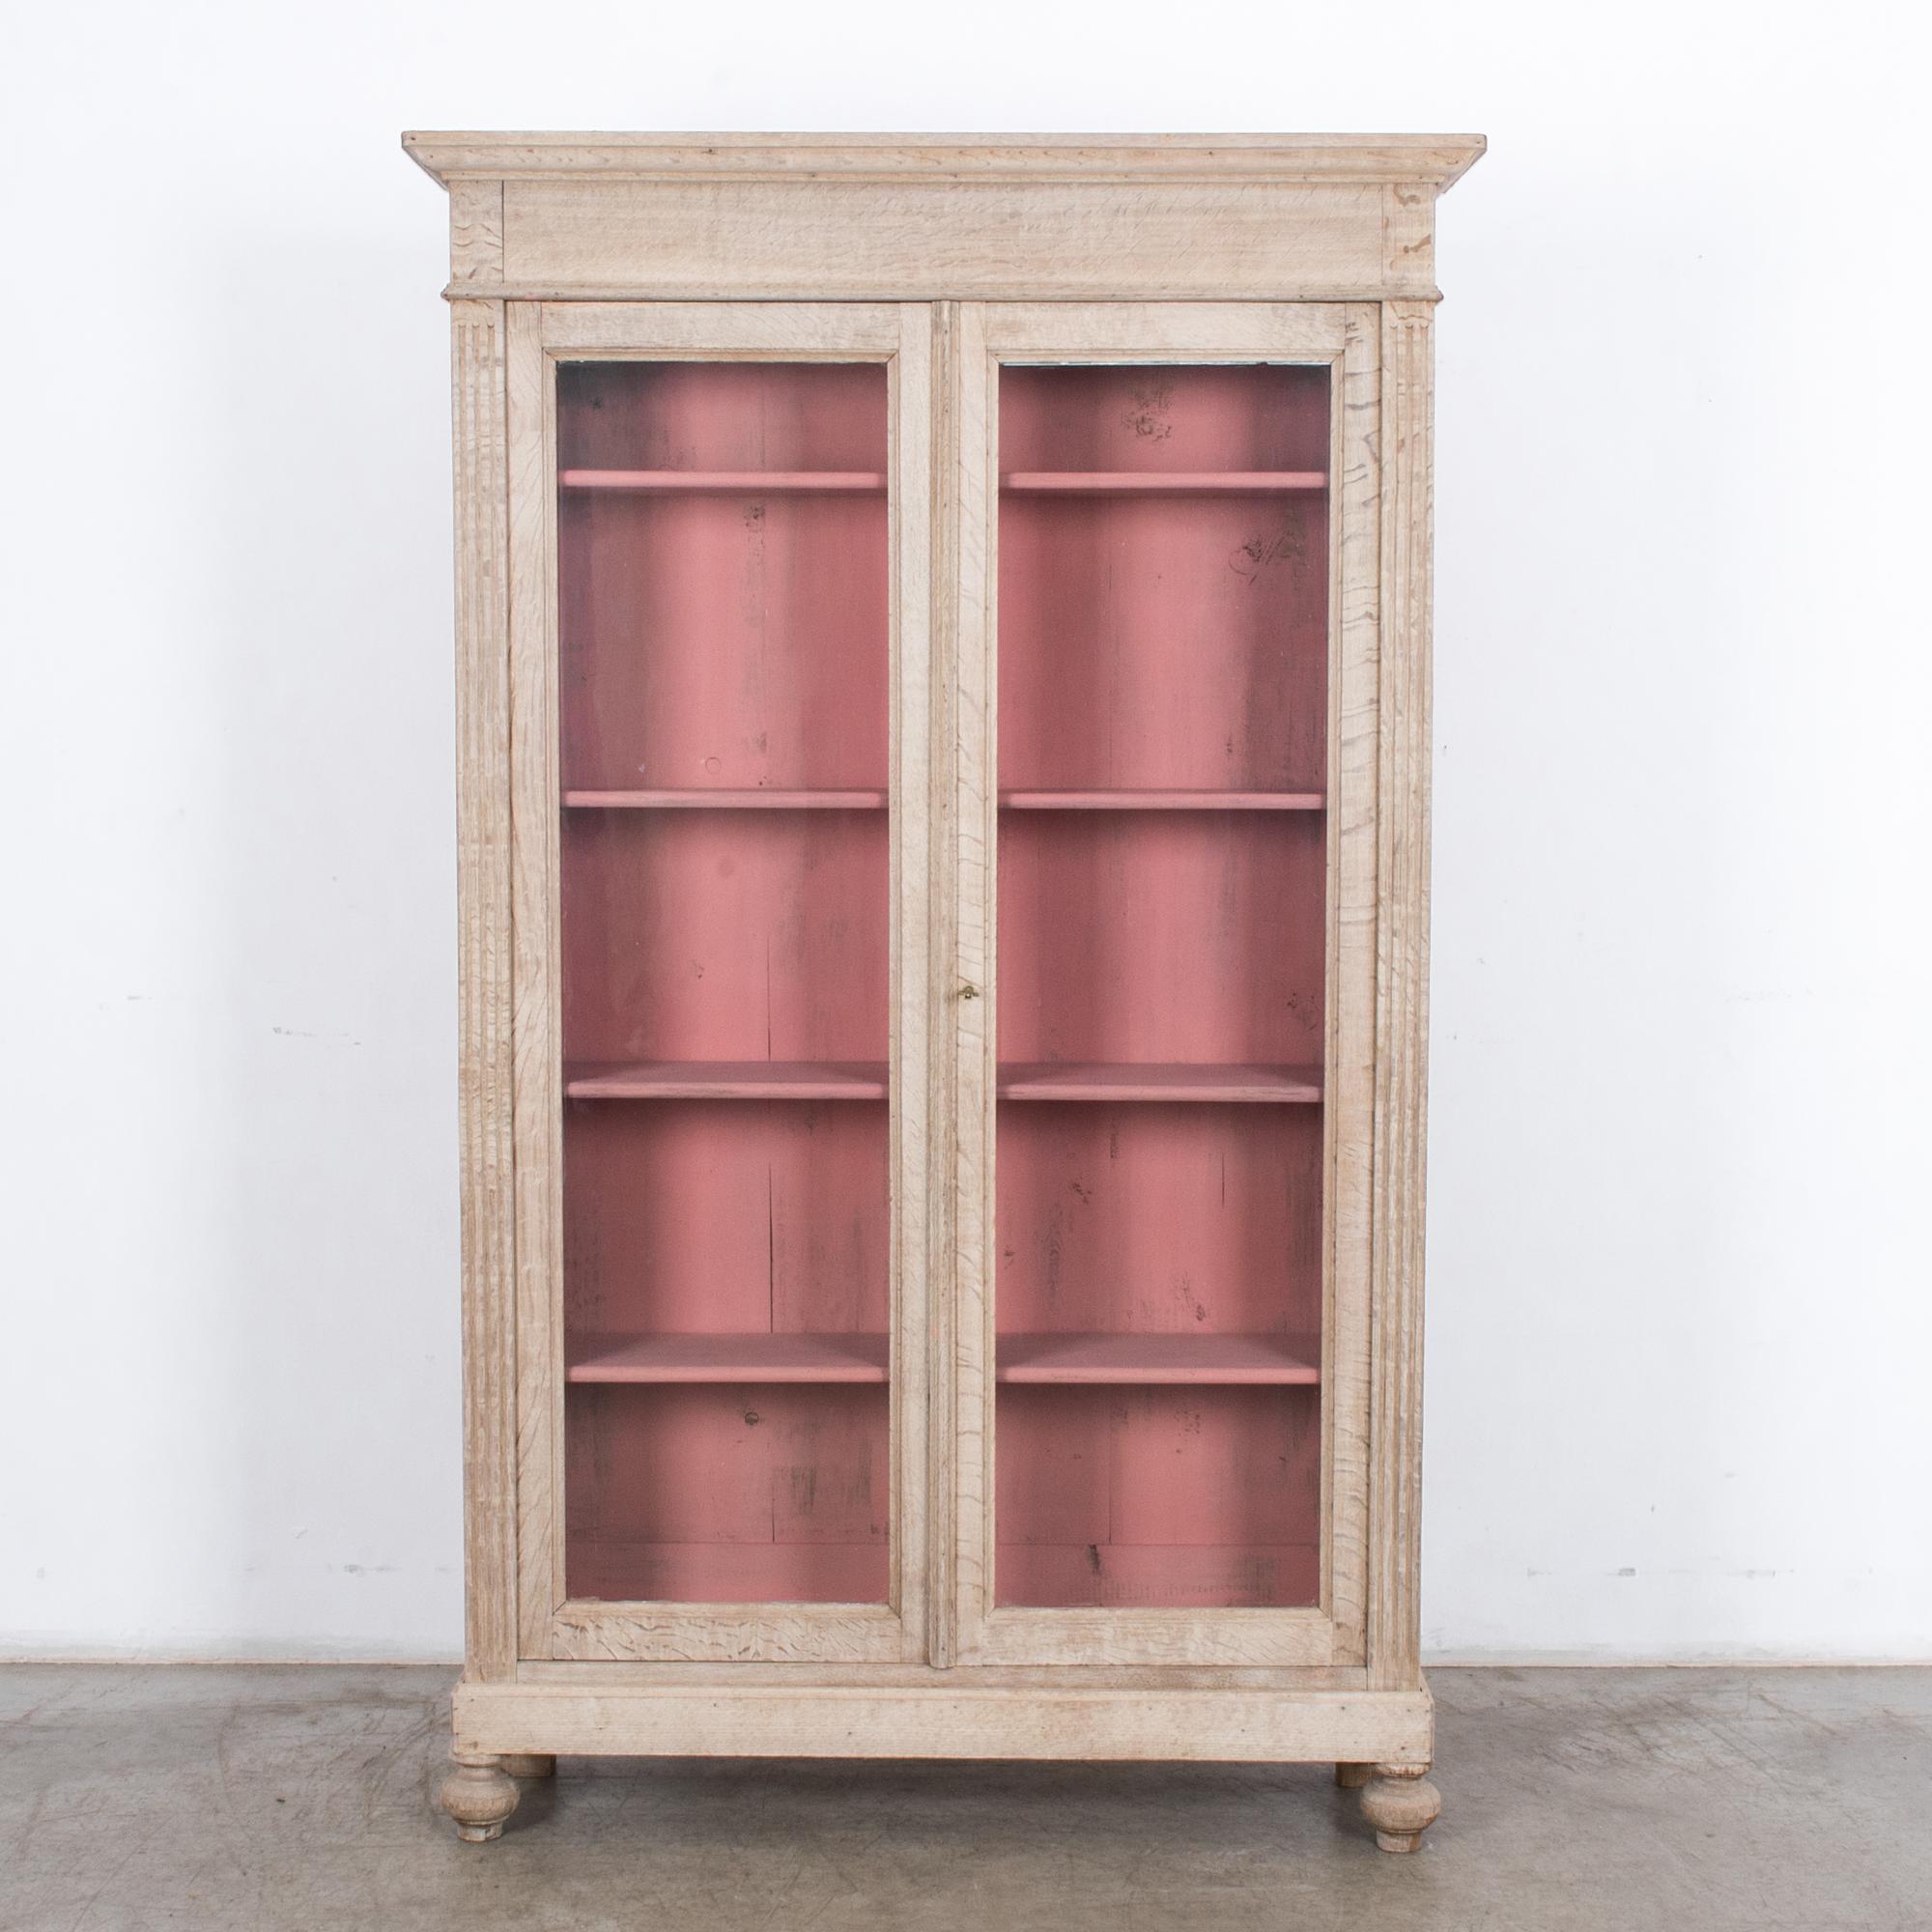 A bleached oak vitrine from France, circa 1900. A pair of glass fronted doors open onto a rose pink interior with four shelves. Fluted moldings on the oak cabinet lend a neoclassical sensibility, sweetened by the pink paint and the light finish of